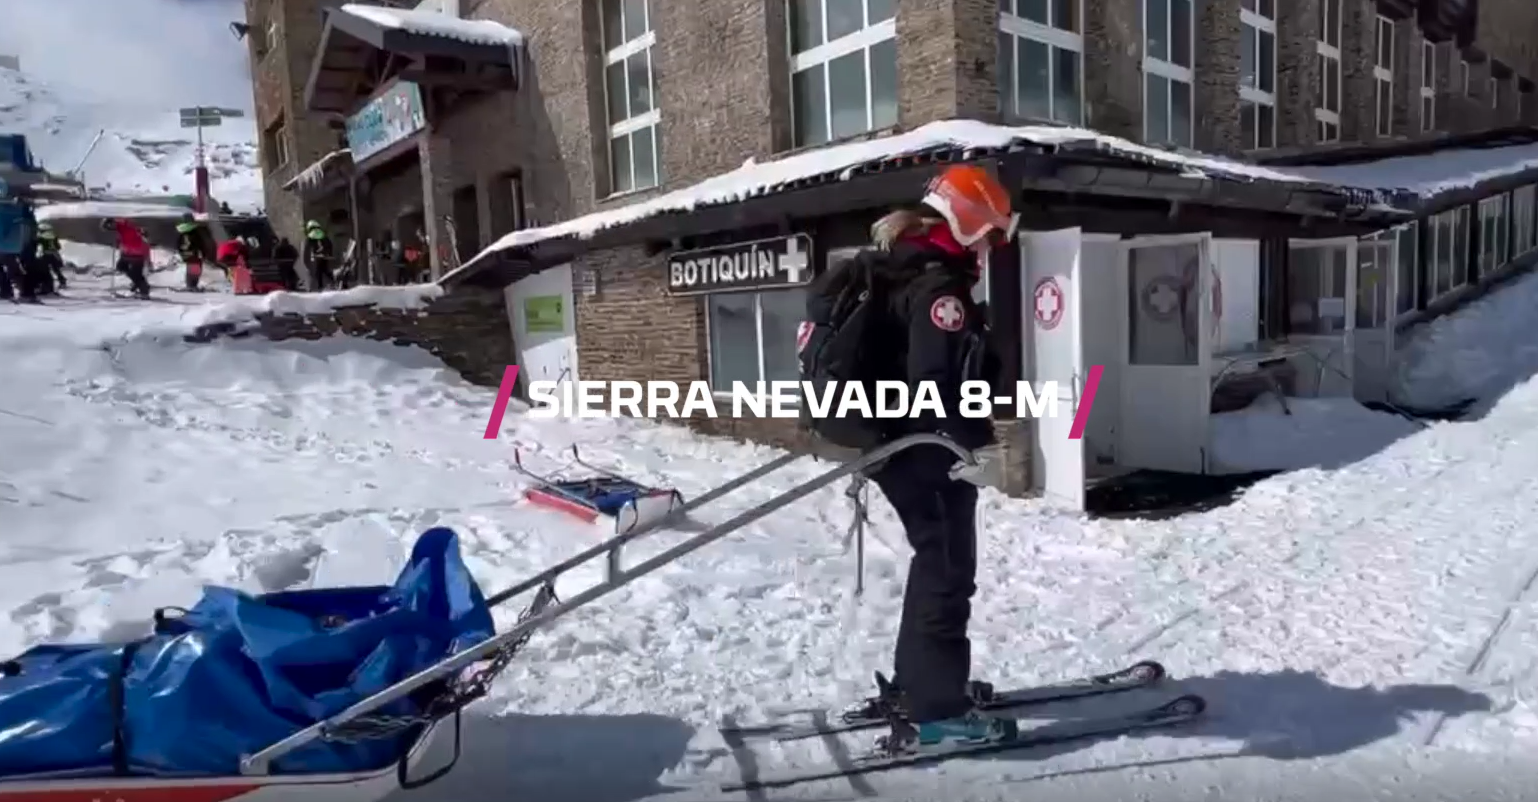 Sierra Nevada pays homaje to the resort's female workers on International Women's Day